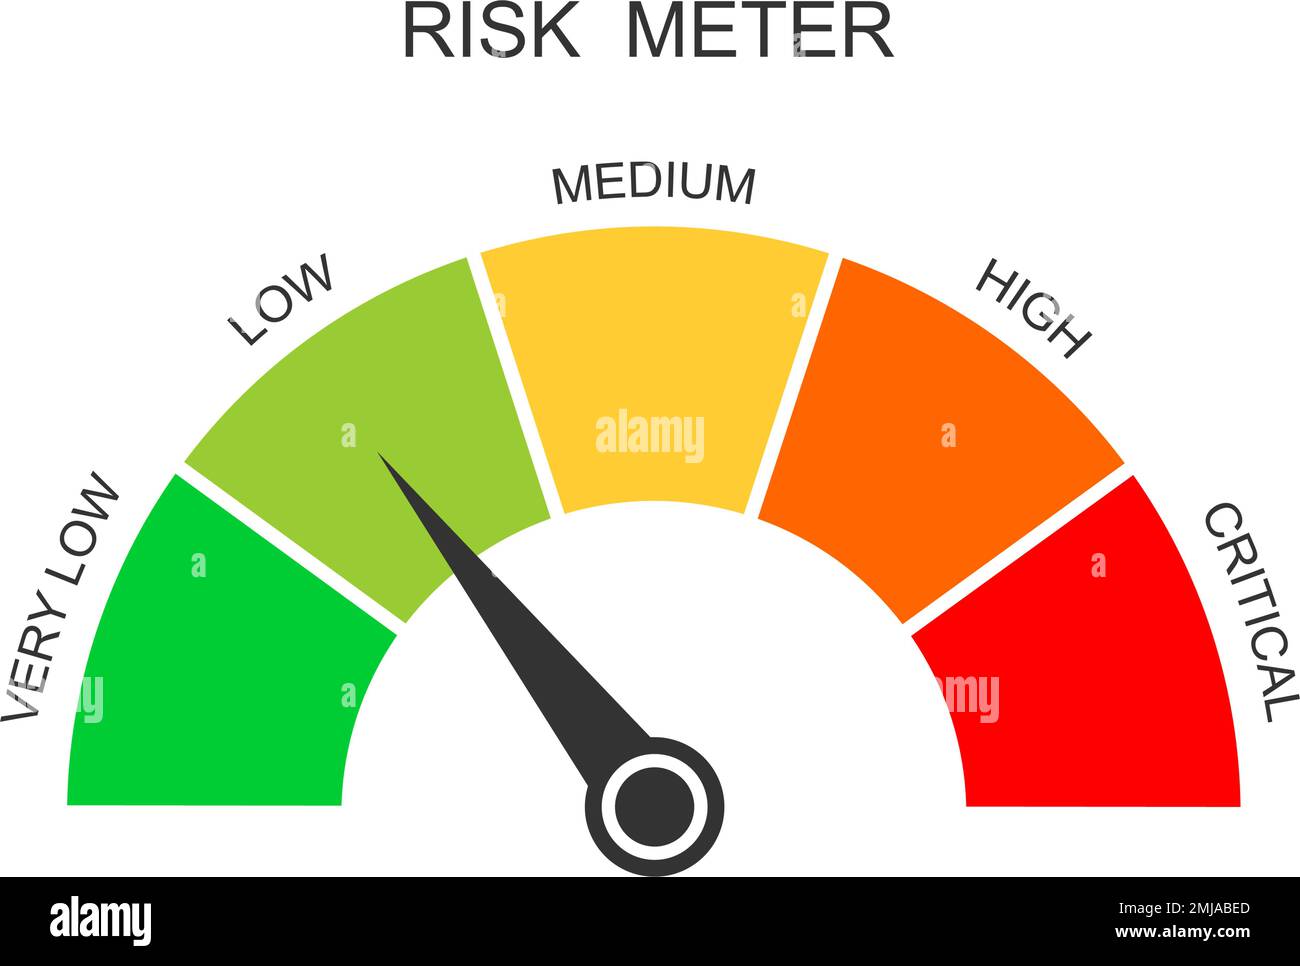 Risk meter icon. Gauge chart with different danger levels isolated on white background. Hazard control dashboard. Risk assess in business, marketing, investment, management. Vector flat illustration Stock Vector